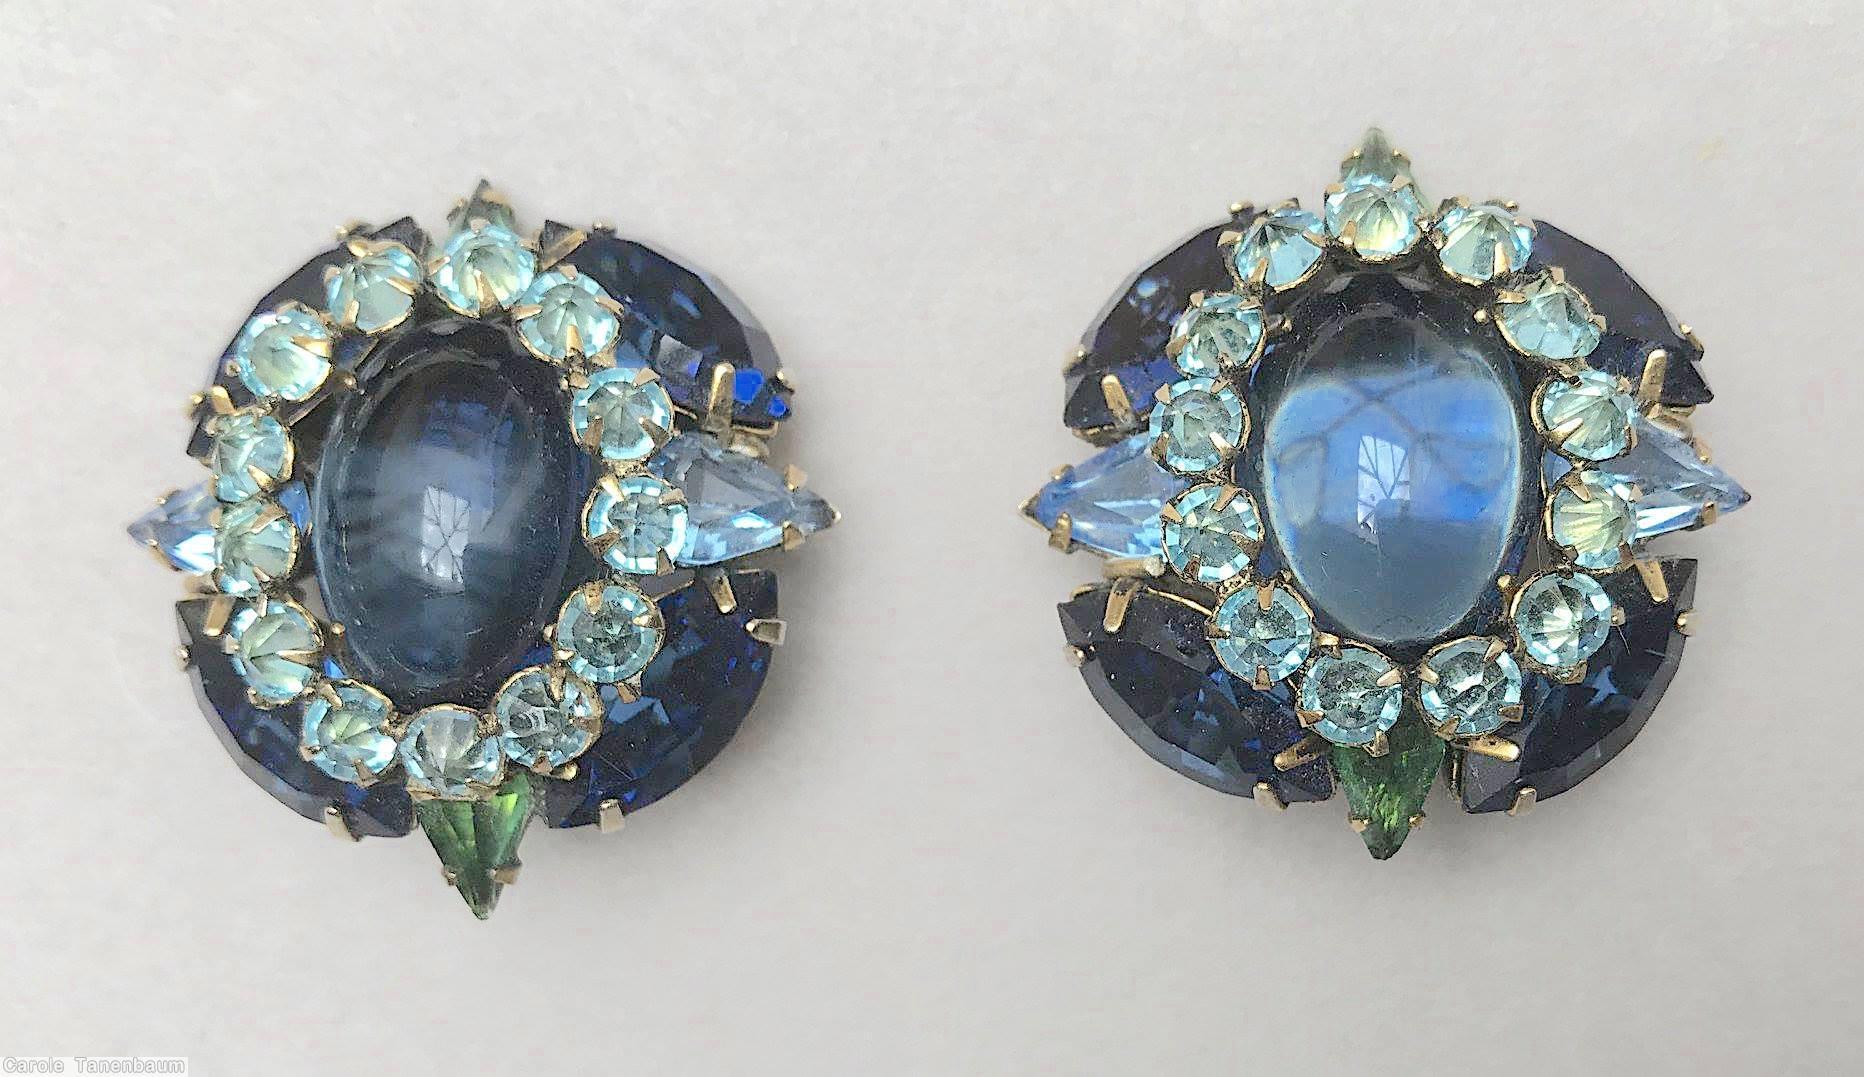 Schreiner 4 navette large oval cab center 13 surrounding chaton 4 teardrop radial earring ice blue openback large oval cab center inverted aqua chaton navy navette green goldtone jewelry